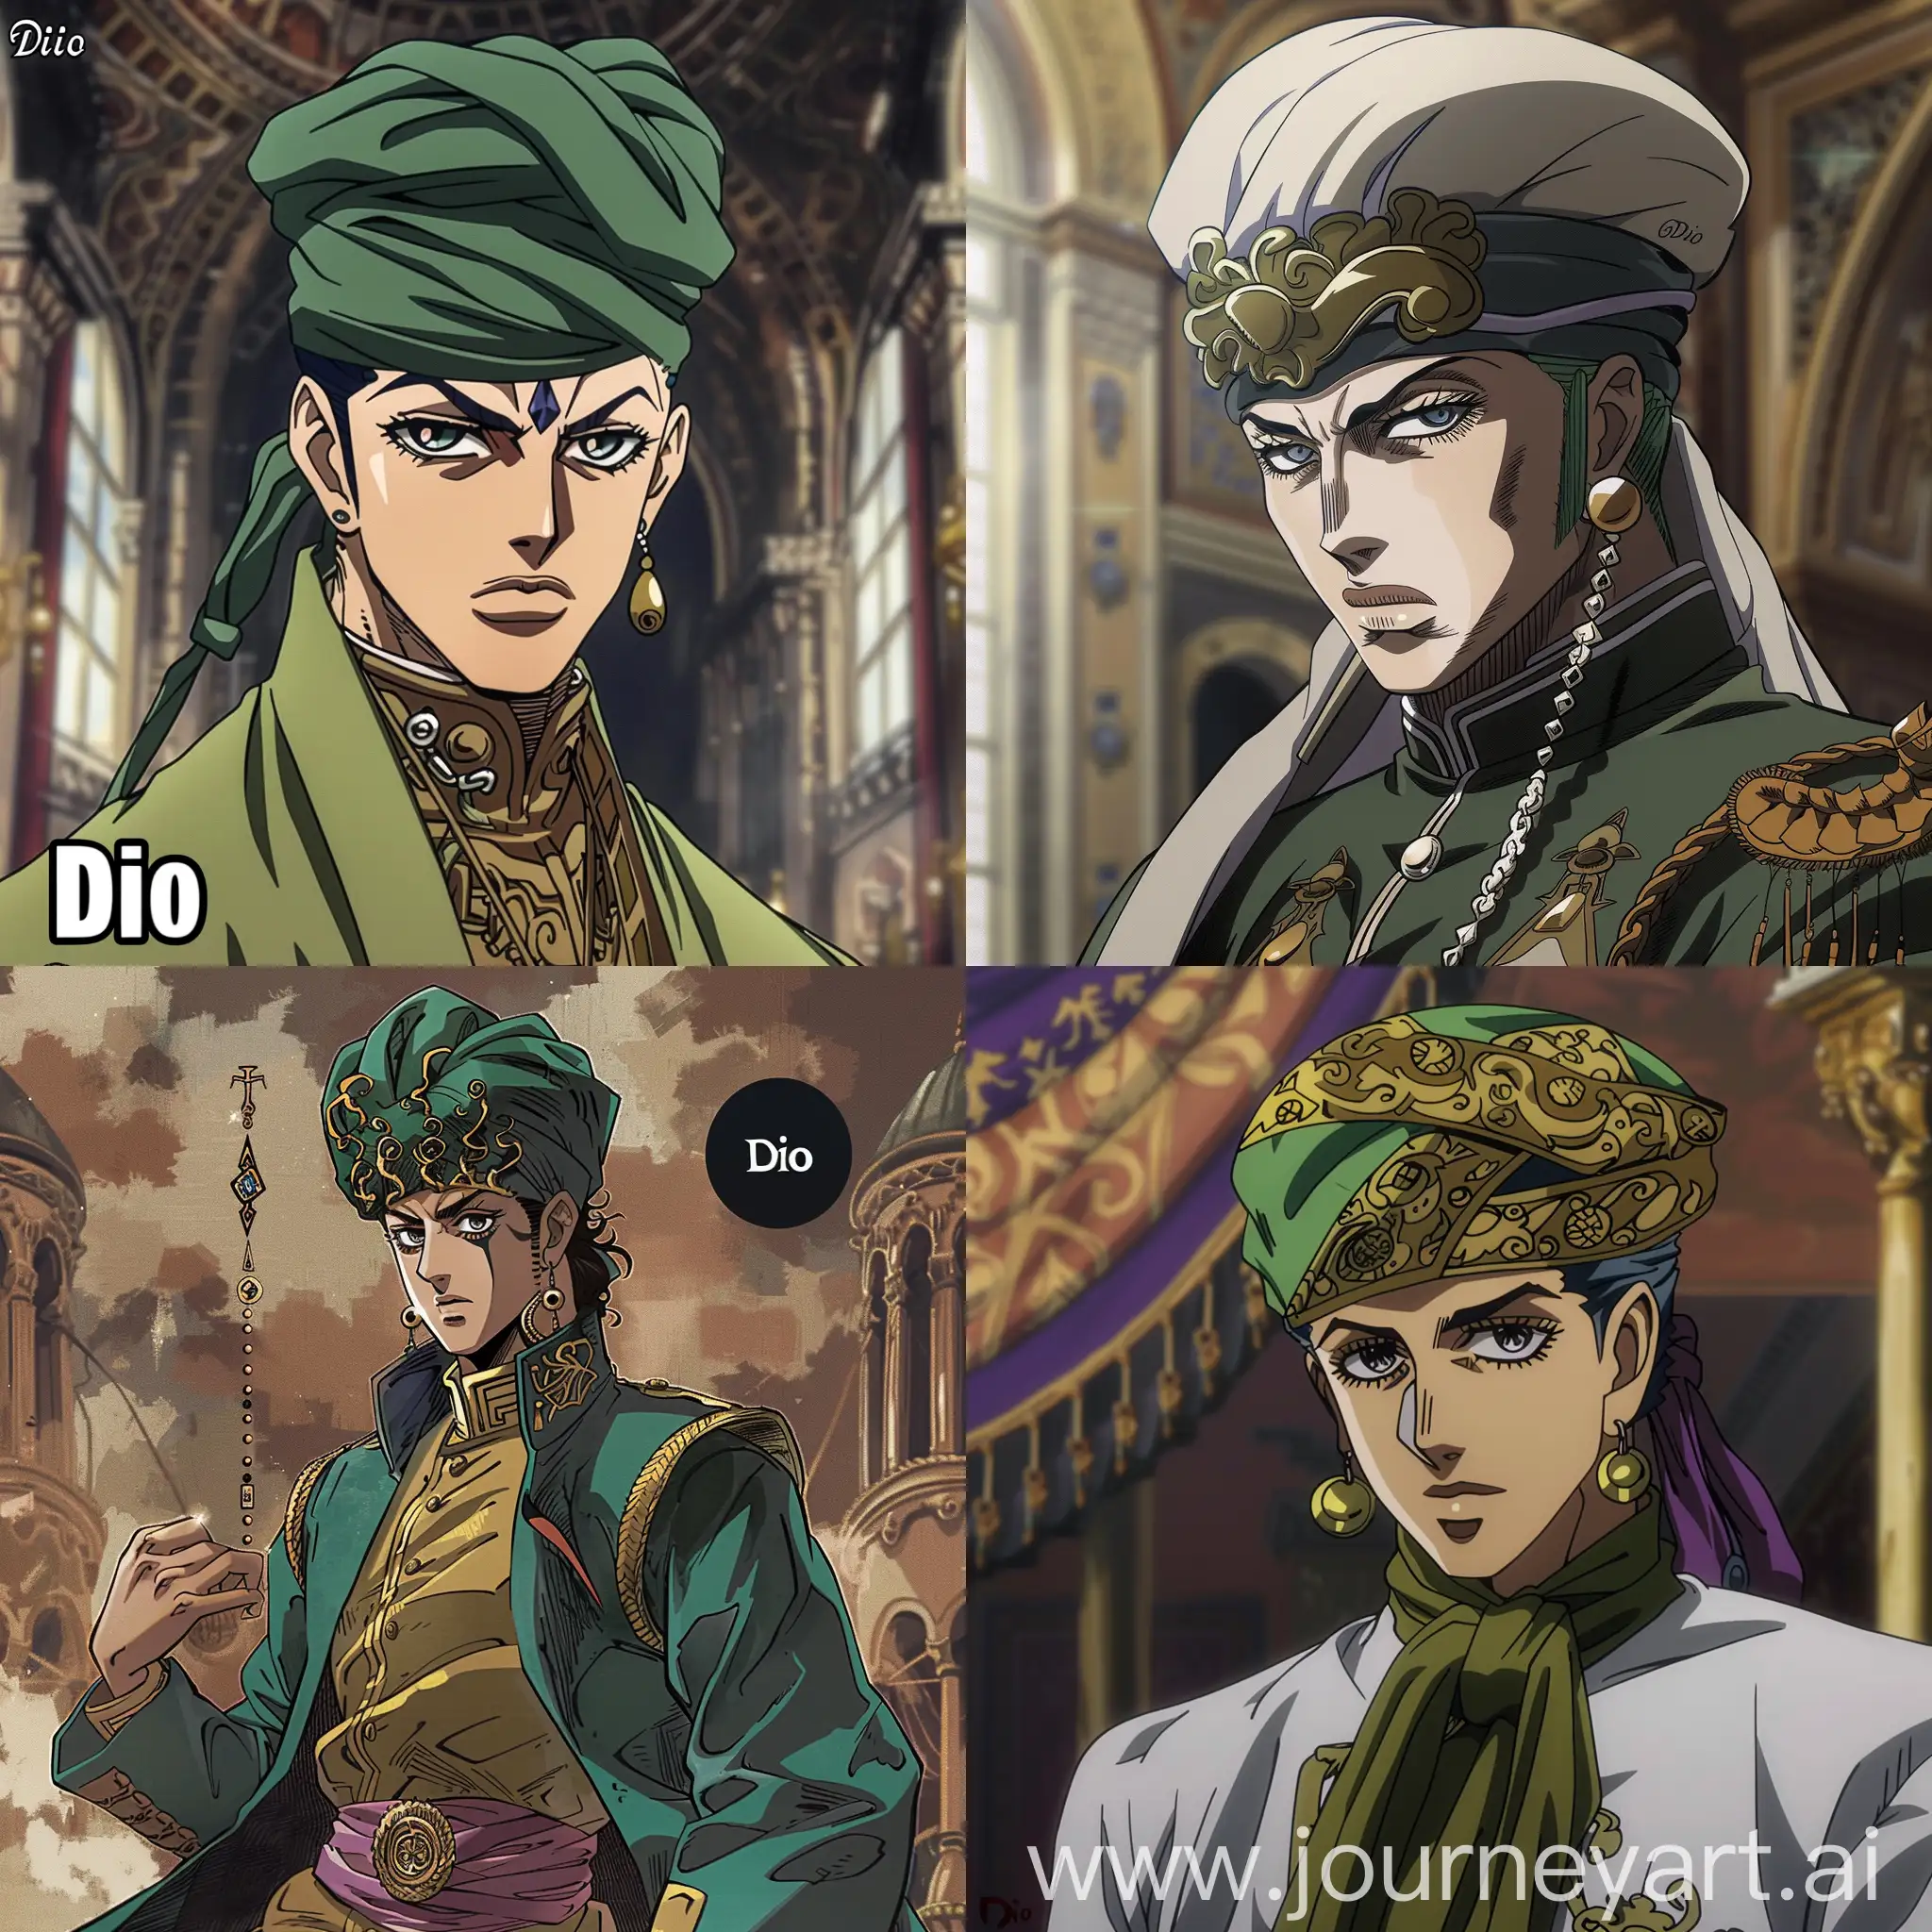 The character “Dio” in the Jojo Bizarre Adventure anime is a pasha in the Ottoman period.